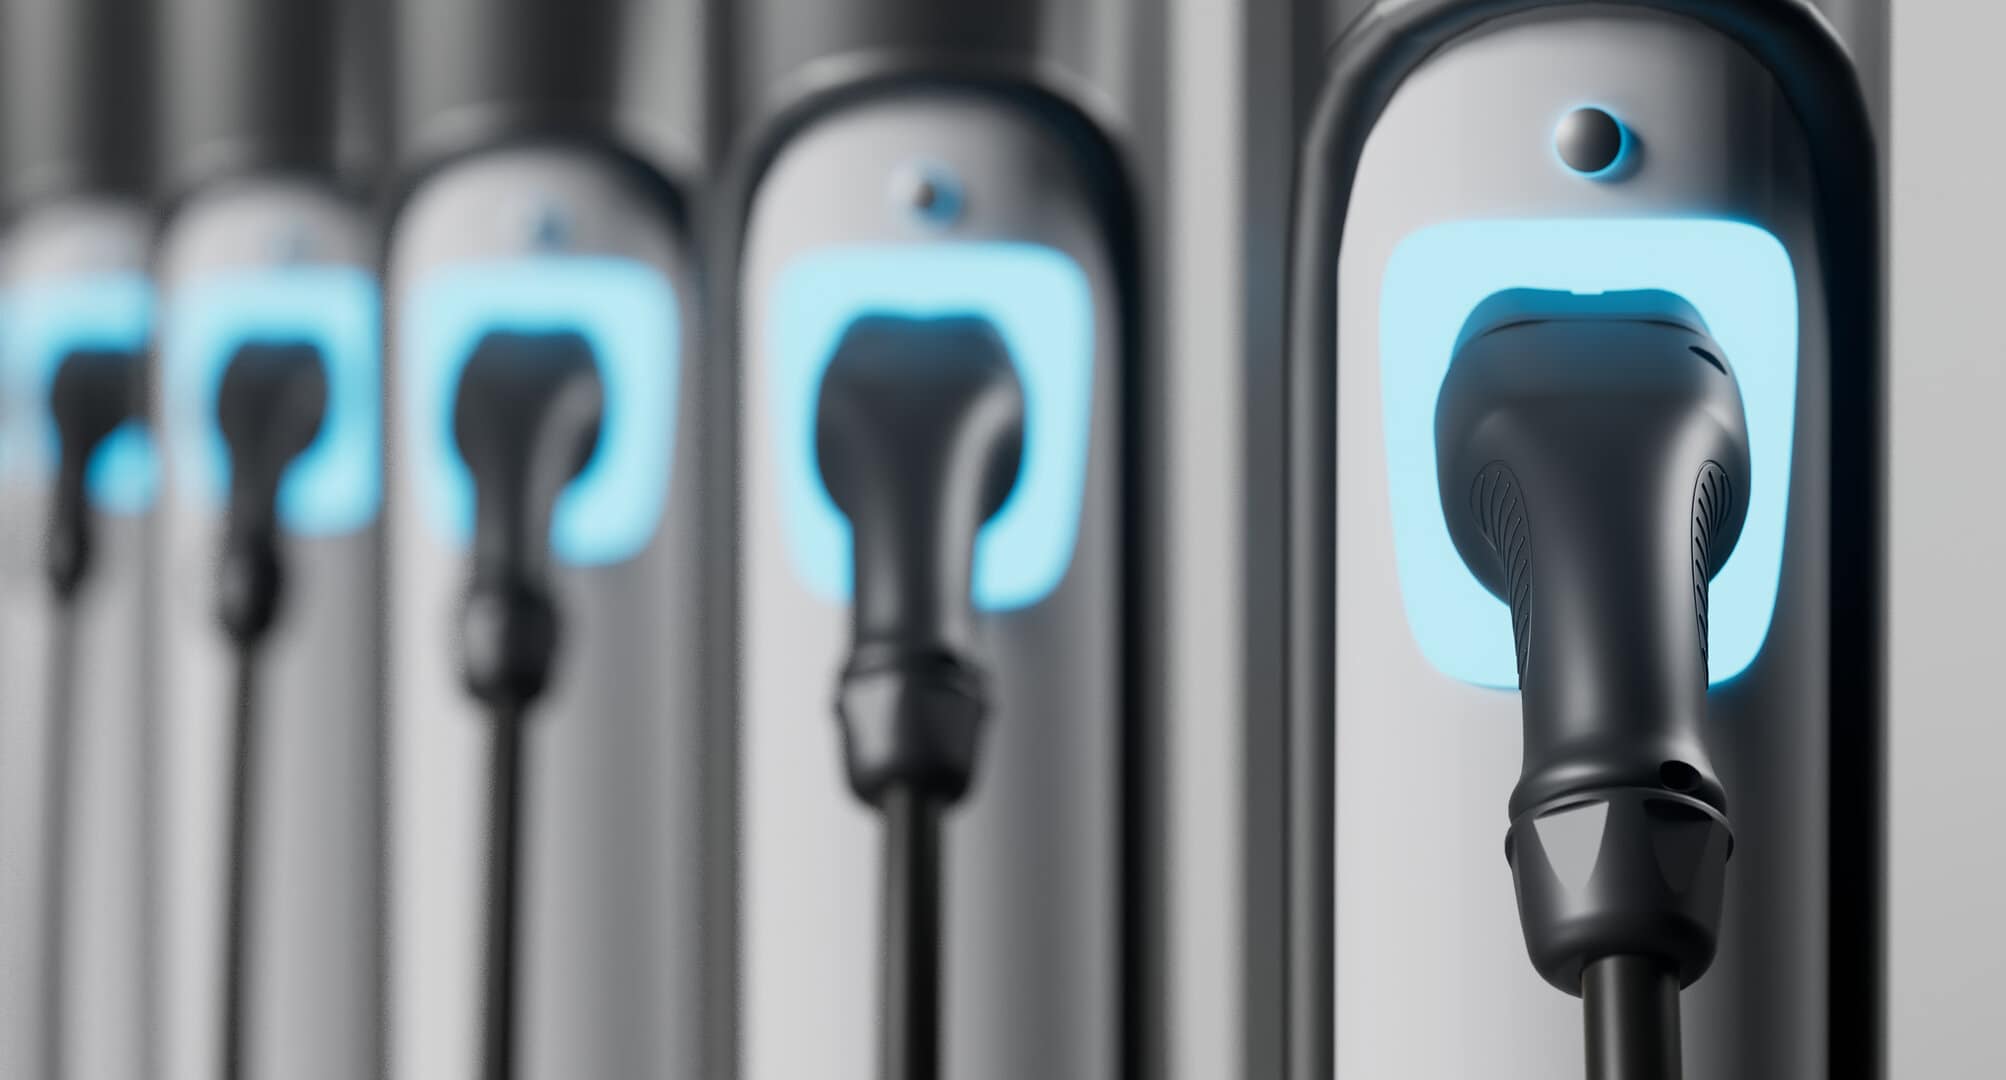 Electric car charging stations, represent the technological advances that are possible when considering construction equipment